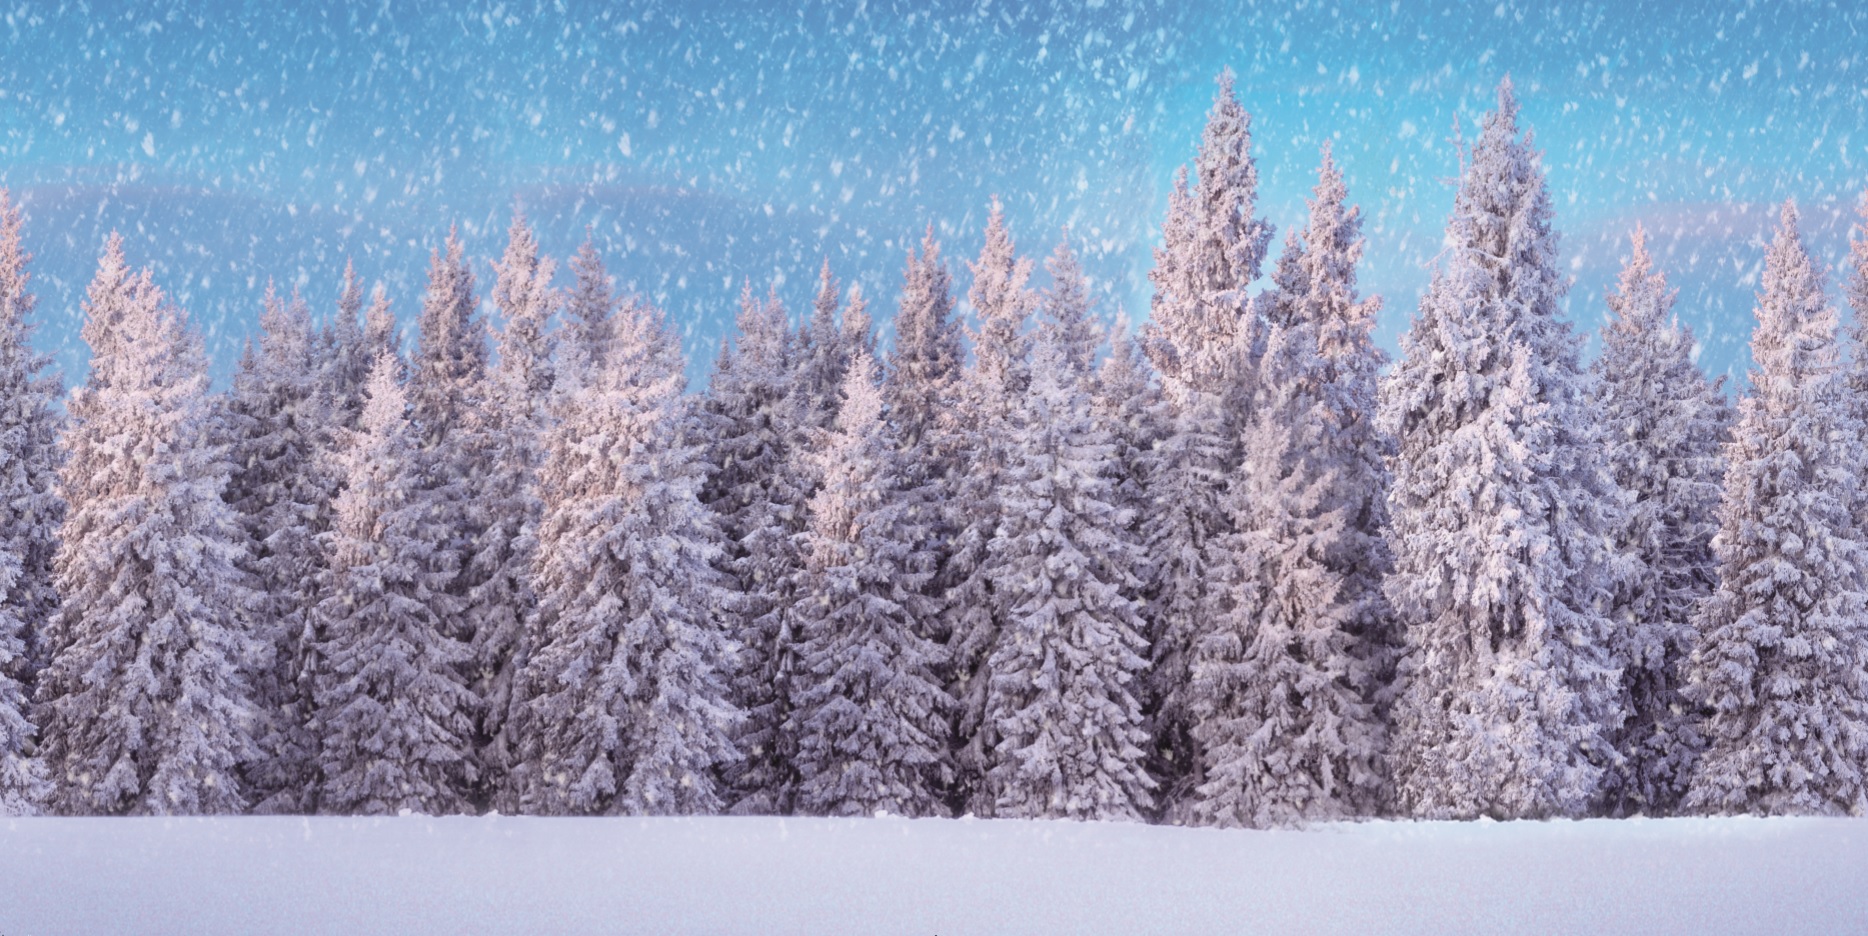 BACKGROUND CLOTH SNOW FOREST 150x75CM